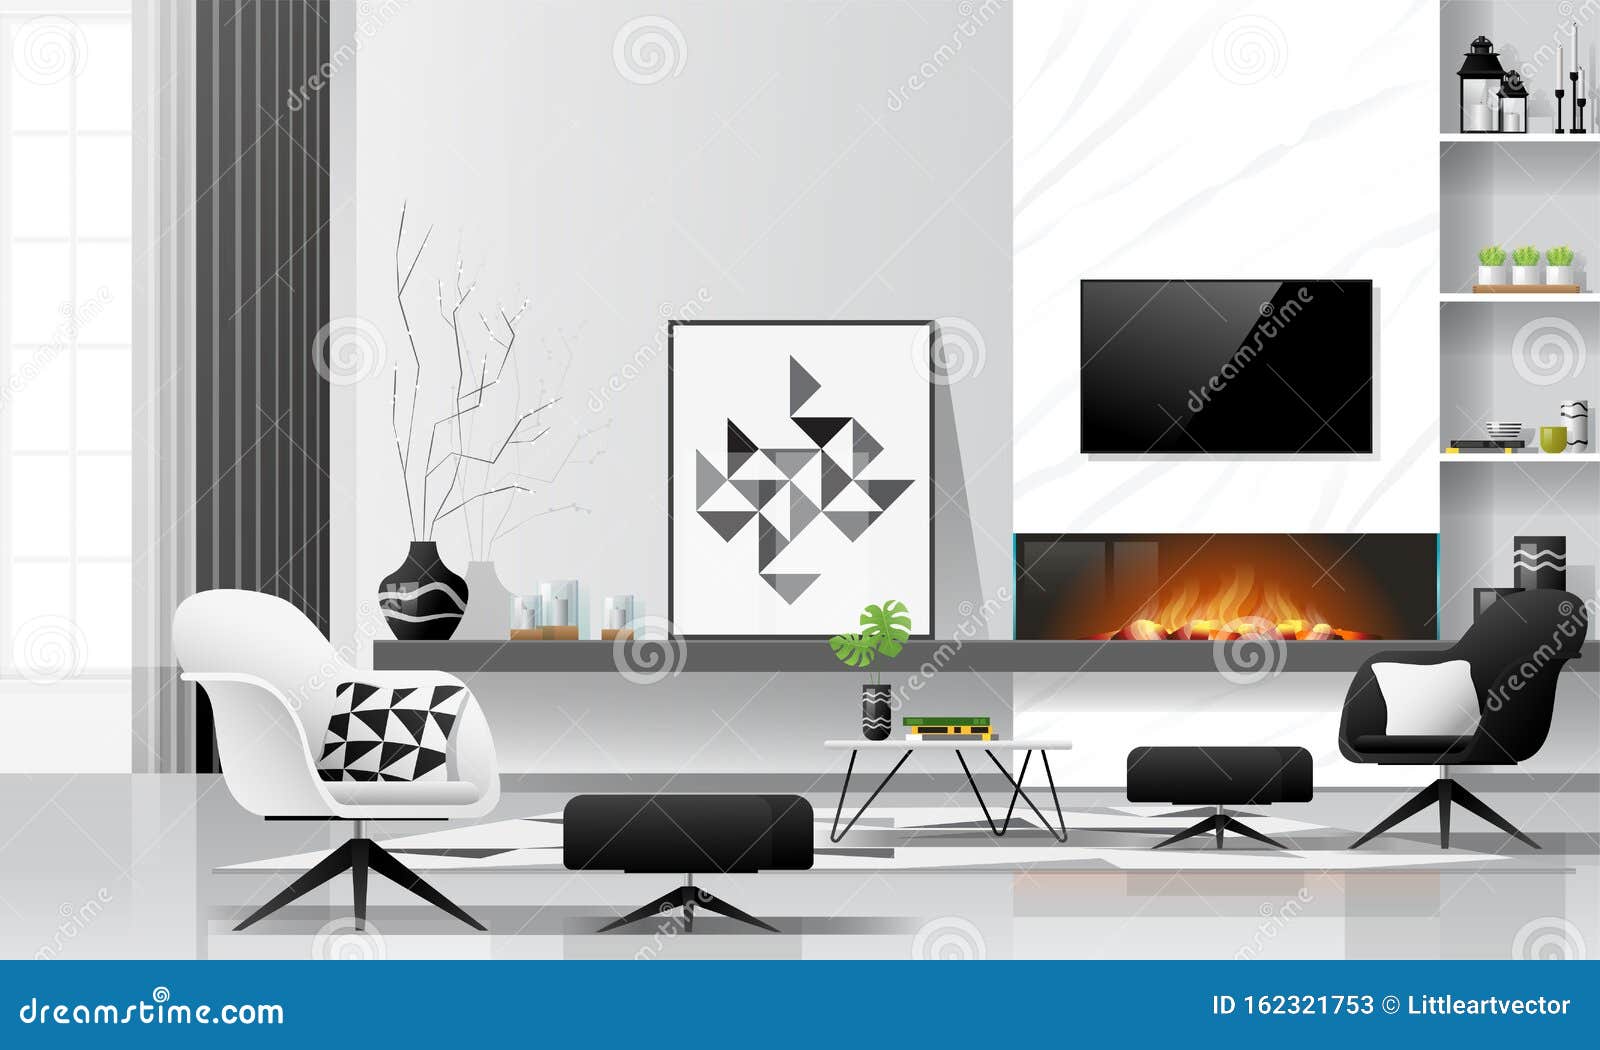 Modern Living Room Interior Background With Fireplace And Furniture In Black  And White Theme Stock Vector - Illustration Of Furniture, Indoor: 162321753